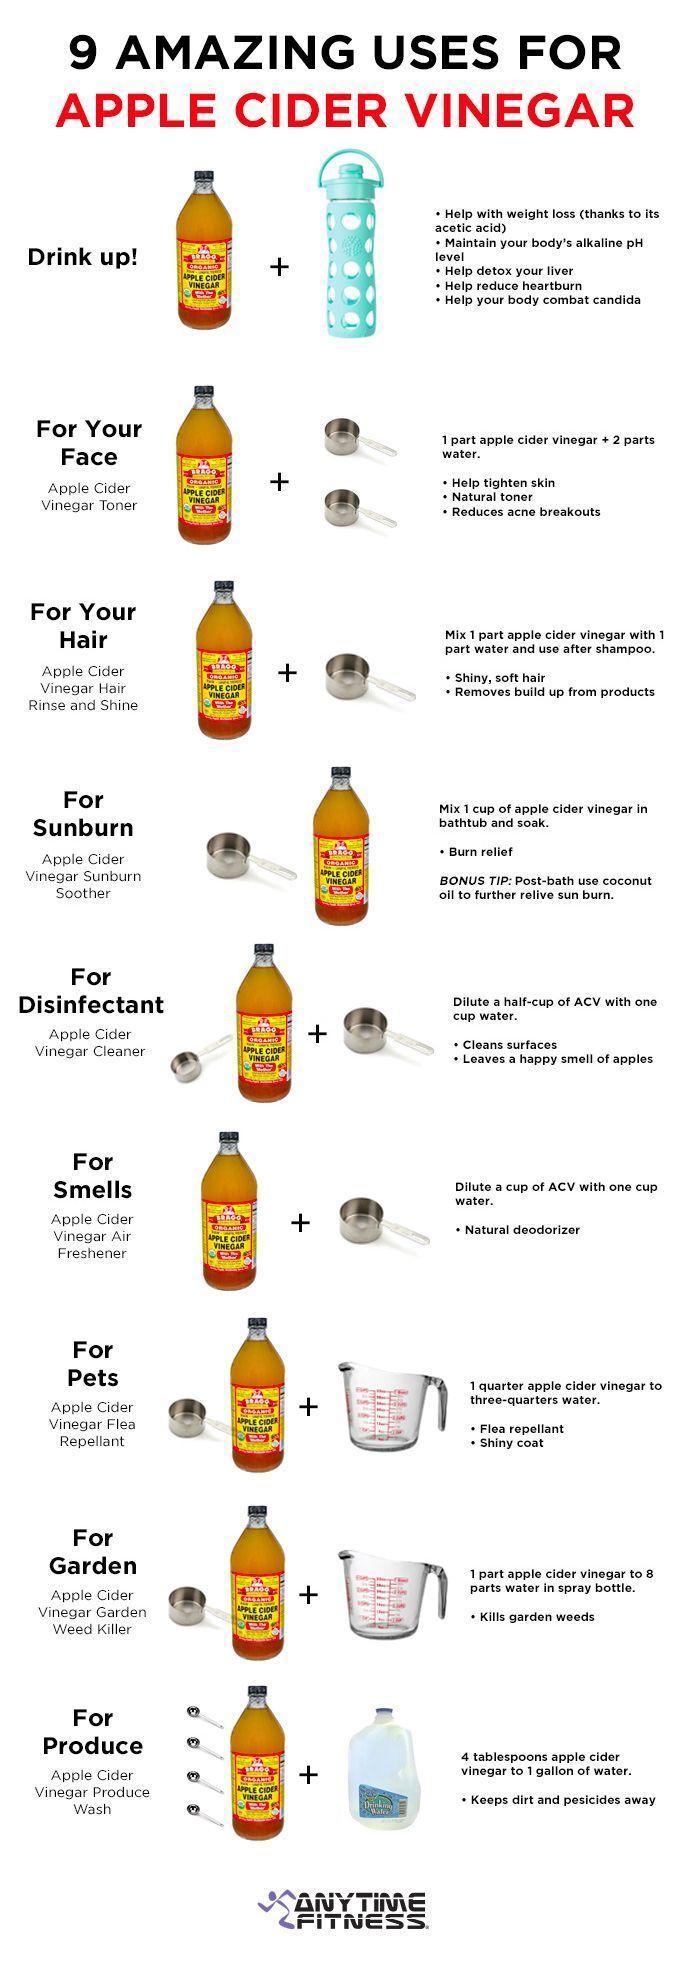 Apple cider vinegar, or ACV, is a well-documented household product that you may use in both cooking and for aid in healing.